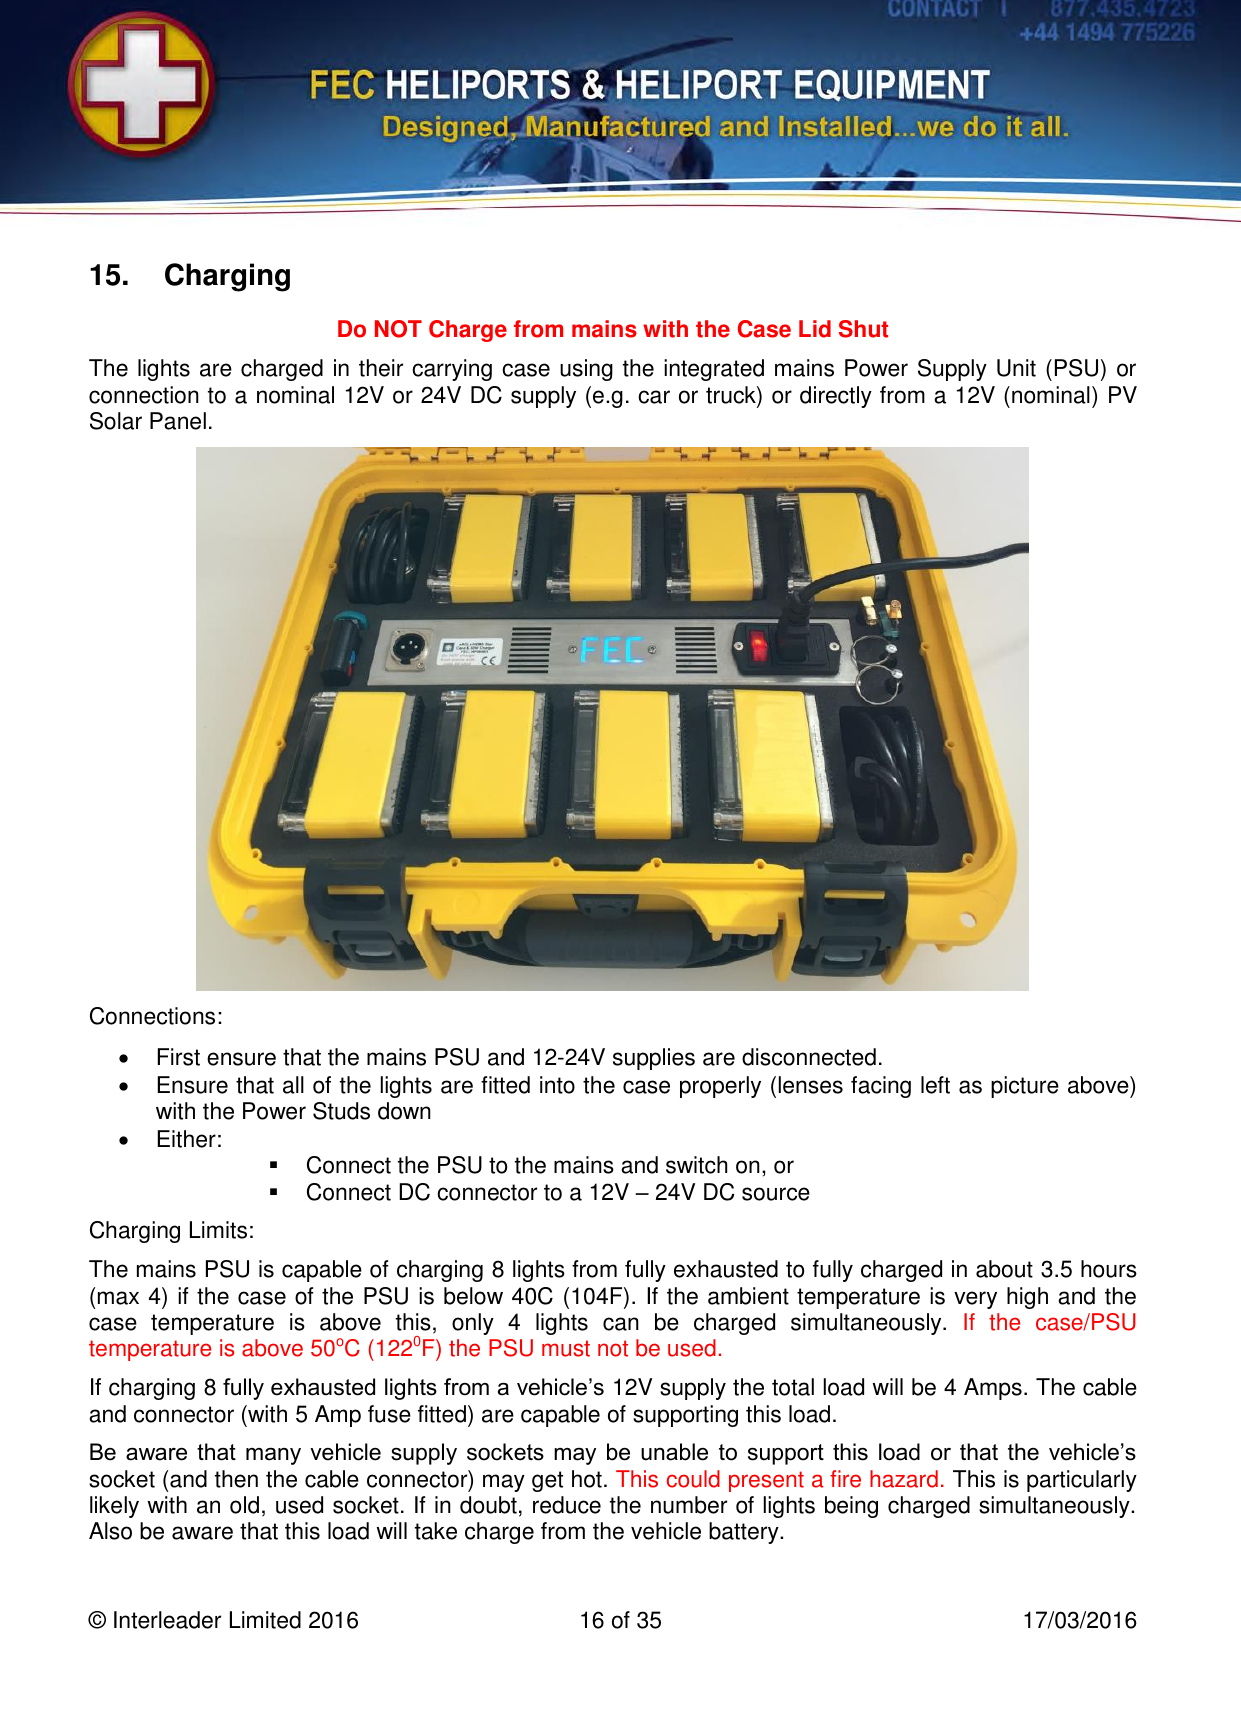   © Interleader Limited 2016  16 of 35  17/03/2016 15.  Charging Do NOT Charge from mains with the Case Lid Shut The lights are charged in their carrying case using the integrated mains Power Supply Unit (PSU) or connection to a nominal 12V or 24V DC supply (e.g. car or truck) or directly from a 12V (nominal) PV Solar Panel.  Connections:   First ensure that the mains PSU and 12-24V supplies are disconnected.   Ensure that all of the lights are fitted into the case properly (lenses facing left as picture above) with the Power Studs down   Either:   Connect the PSU to the mains and switch on, or   Connect DC connector to a 12V – 24V DC source Charging Limits: The mains PSU is capable of charging 8 lights from fully exhausted to fully charged in about 3.5 hours (max 4) if the case of the PSU is below 40C (104F). If the ambient temperature is very high and the case  temperature  is  above  this,  only  4  lights  can  be  charged  simultaneously.  If  the  case/PSU temperature is above 50oC (1220F) the PSU must not be used. If charging 8 fully exhausted lights from a vehicle’s 12V supply the total load will be 4 Amps. The cable and connector (with 5 Amp fuse fitted) are capable of supporting this load. Be aware that  many vehicle  supply sockets may  be  unable to  support  this load  or  that  the  vehicle’s socket (and then the cable connector) may get hot. This could present a fire hazard. This is particularly likely with an old, used socket. If in doubt, reduce the number of lights being charged simultaneously. Also be aware that this load will take charge from the vehicle battery. 